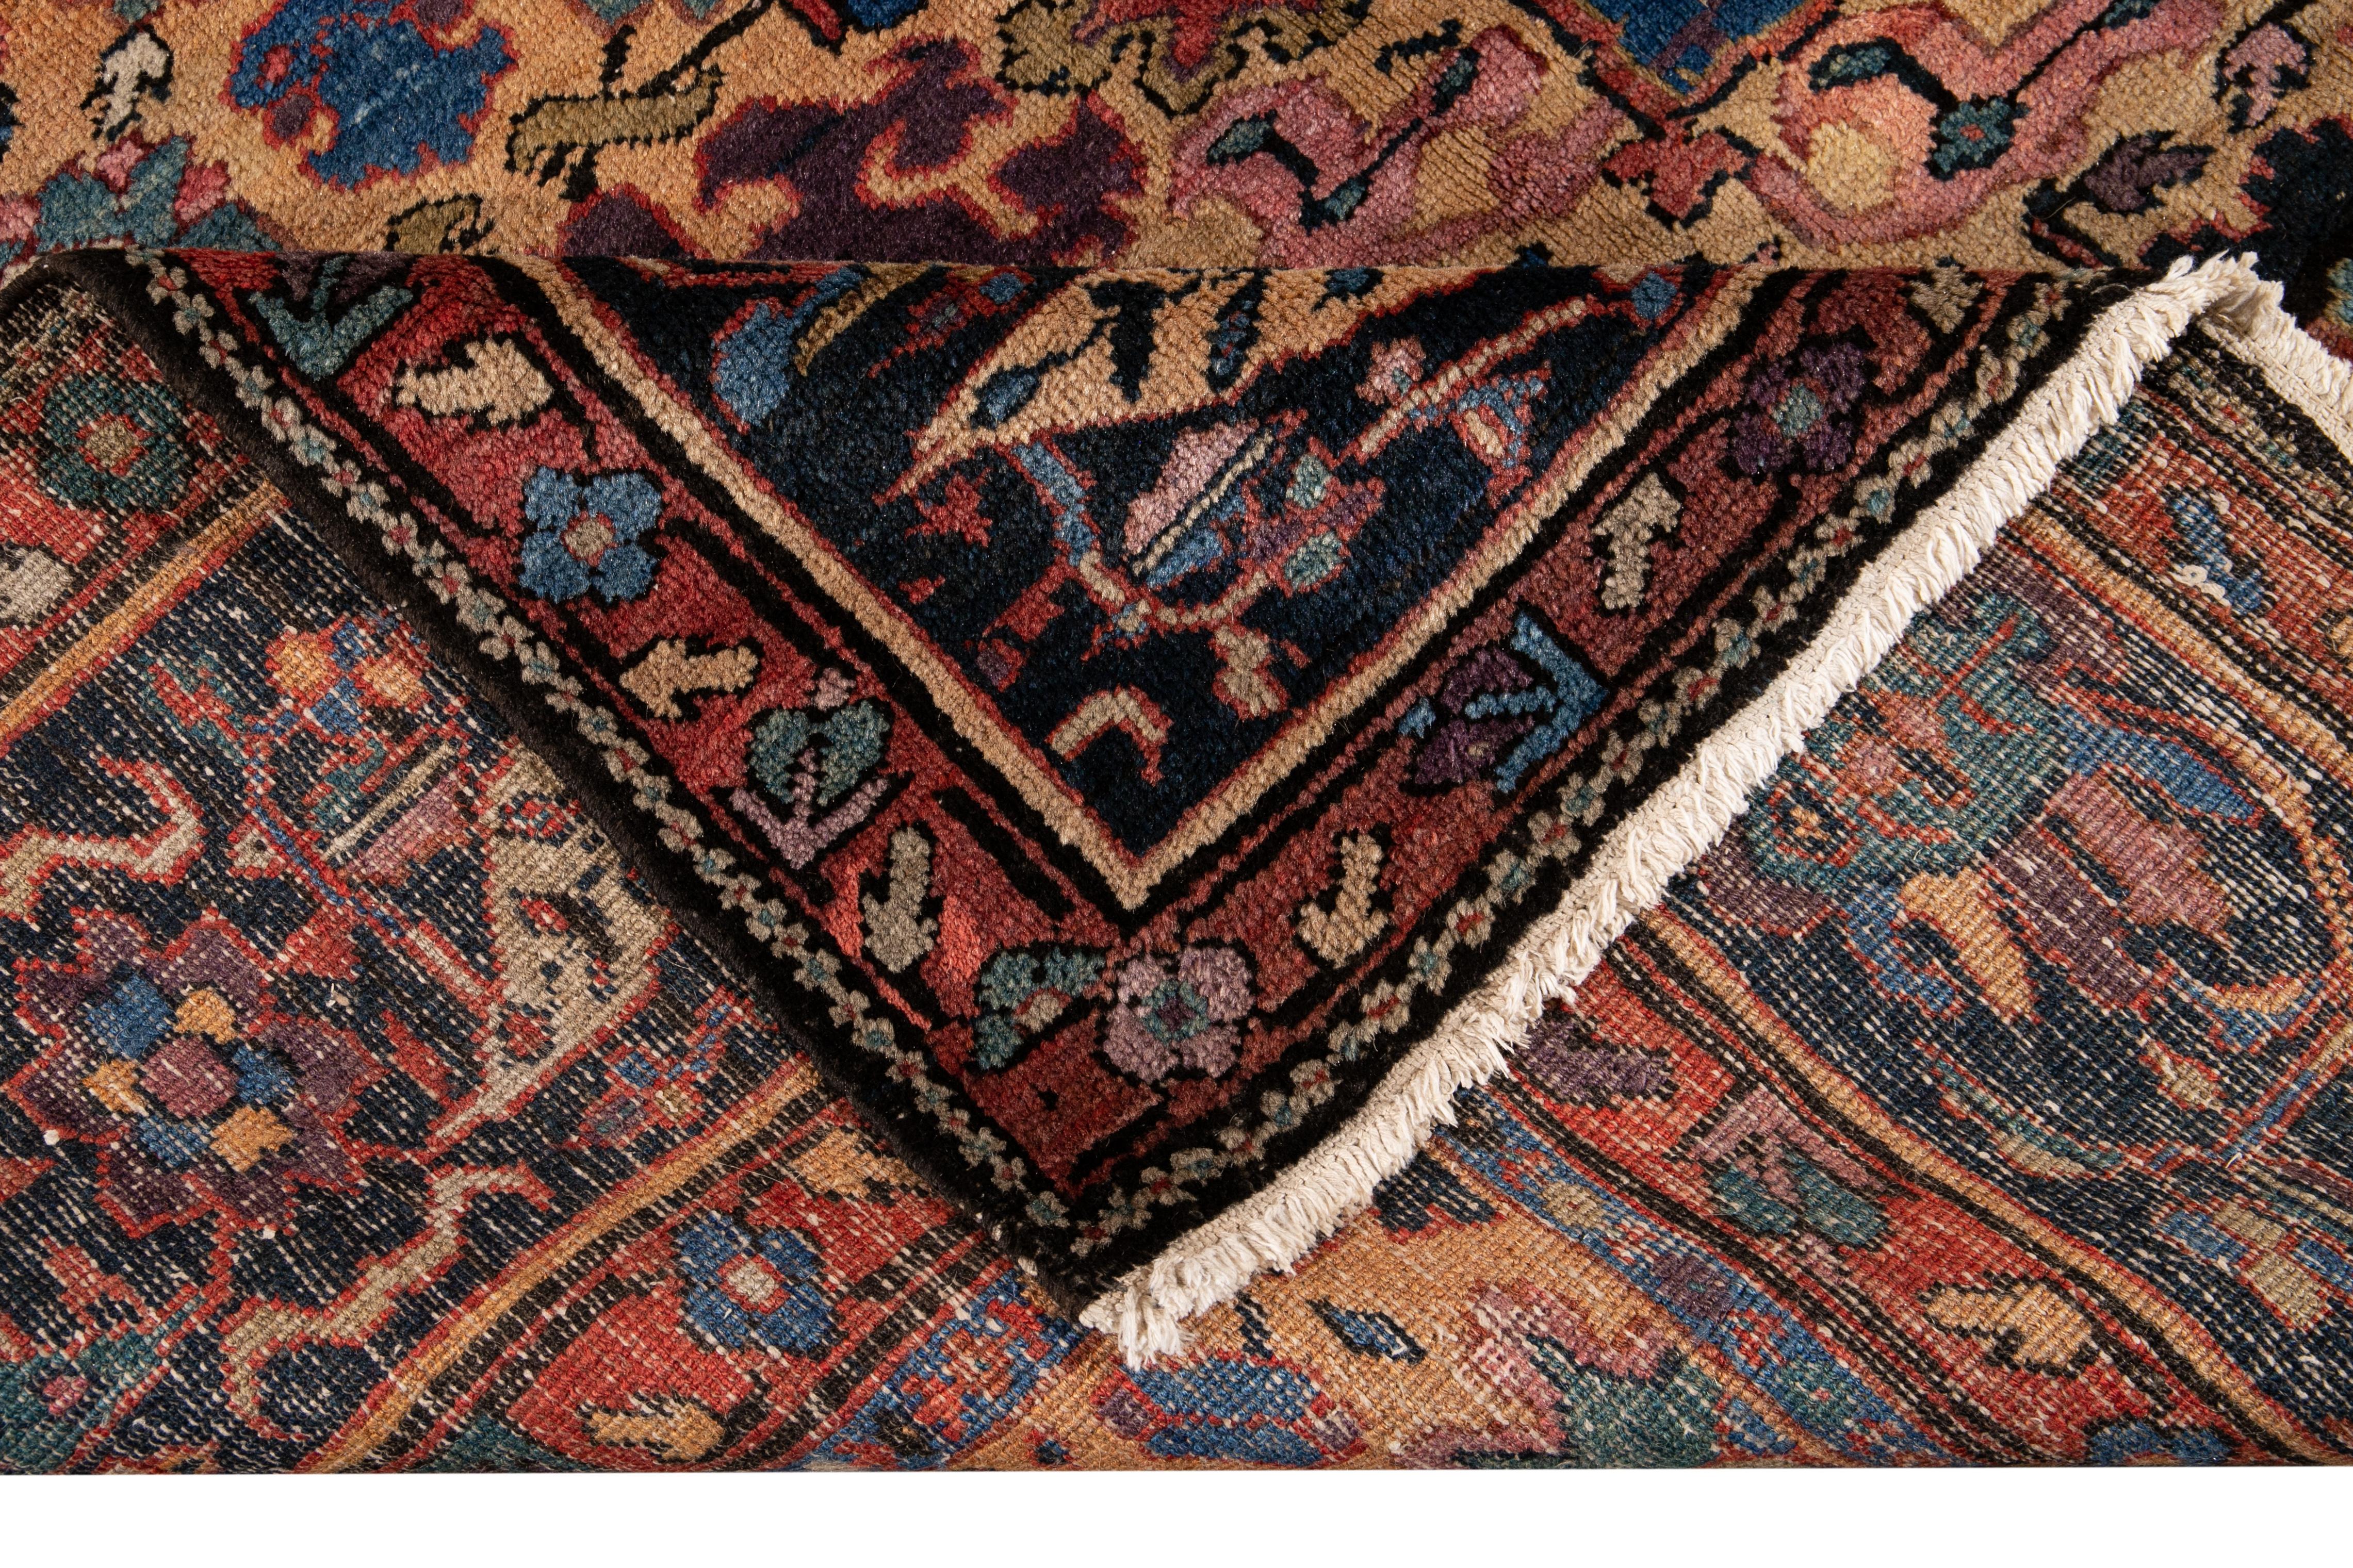 A beautiful Antique Mahal hand-knotted wool rug with a tan color field. This rug has navy blue and multicolor accents in an all-over geometric floral design.

This rug measures 11' x 14'.